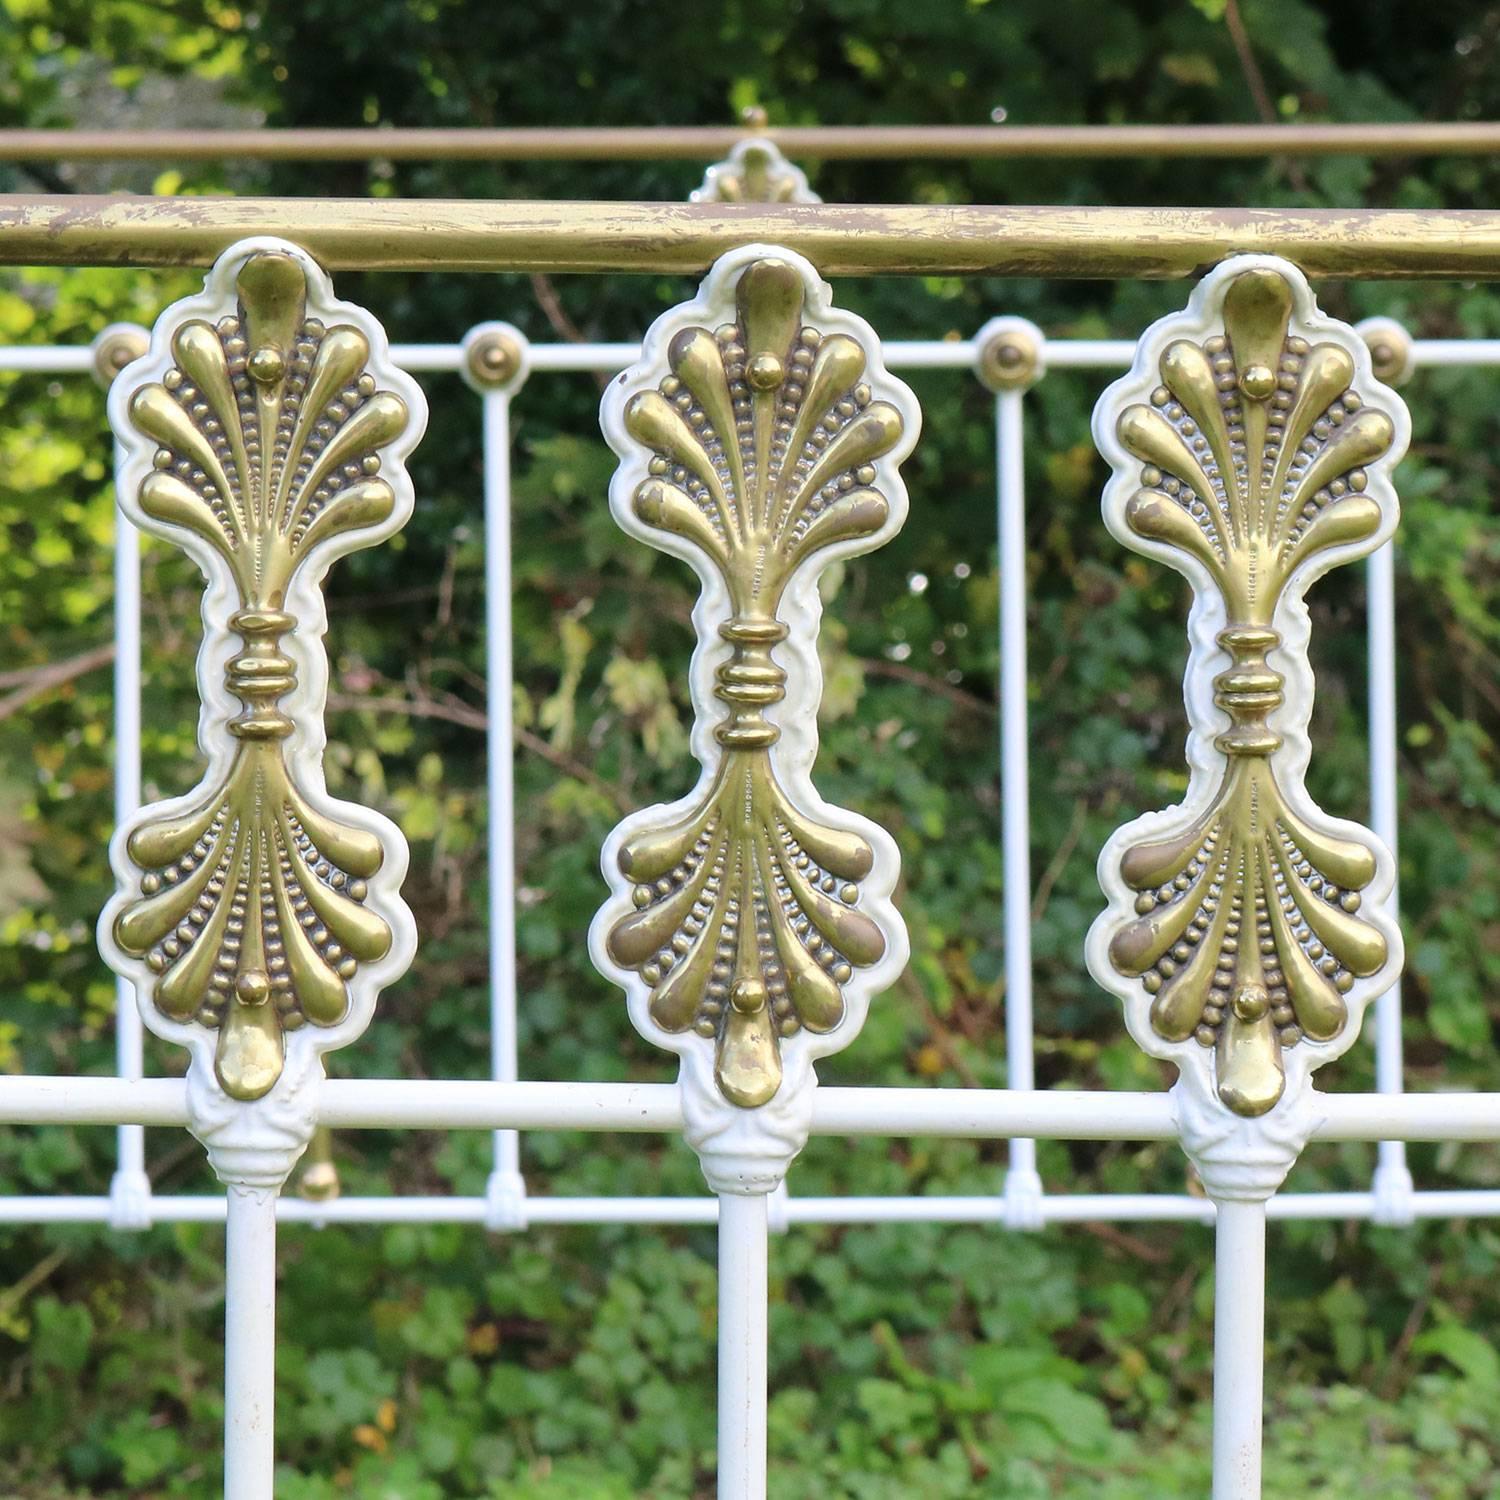 A decorative brass and iron bed with ornate panel decoration, finished in cream.

This bed accepts a British king-size or American queen-size (5ft, 60in or 150cm wide) base and mattress set.

The price includes a standard firm bed base to support